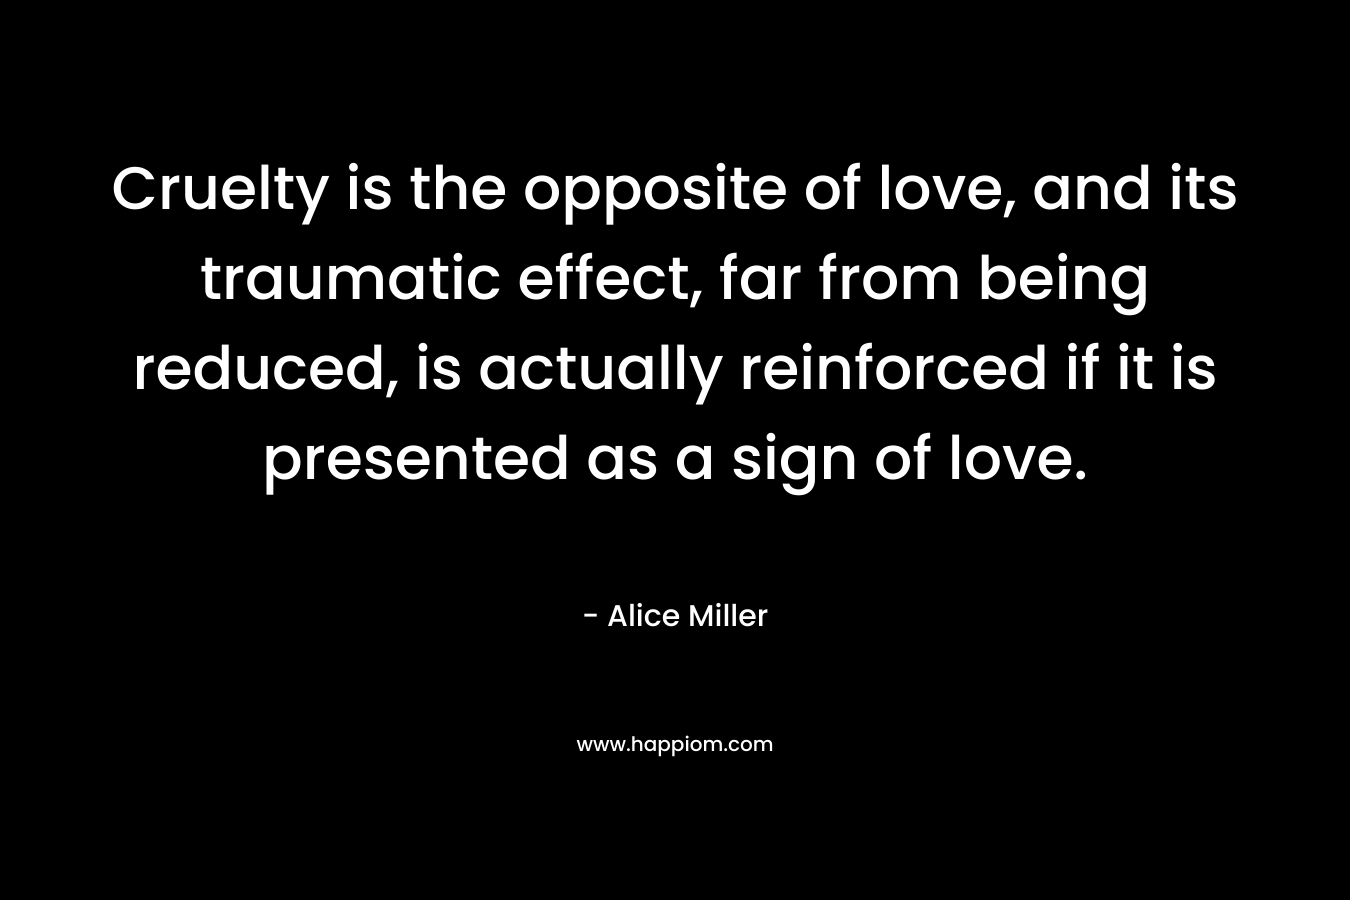 Cruelty is the opposite of love, and its traumatic effect, far from being reduced, is actually reinforced if it is presented as a sign of love. – Alice  Miller